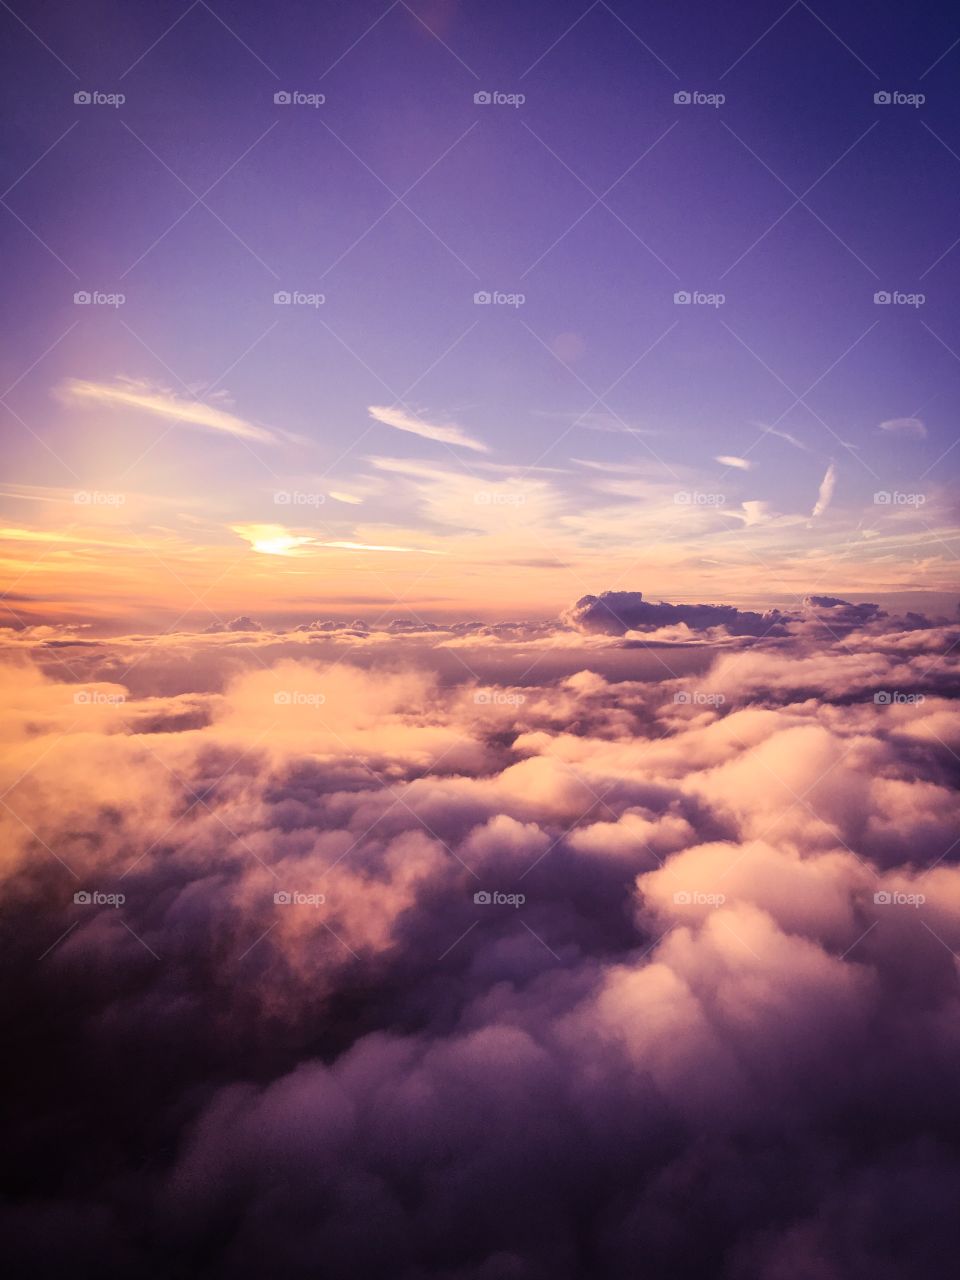 Flying above the clouds. 